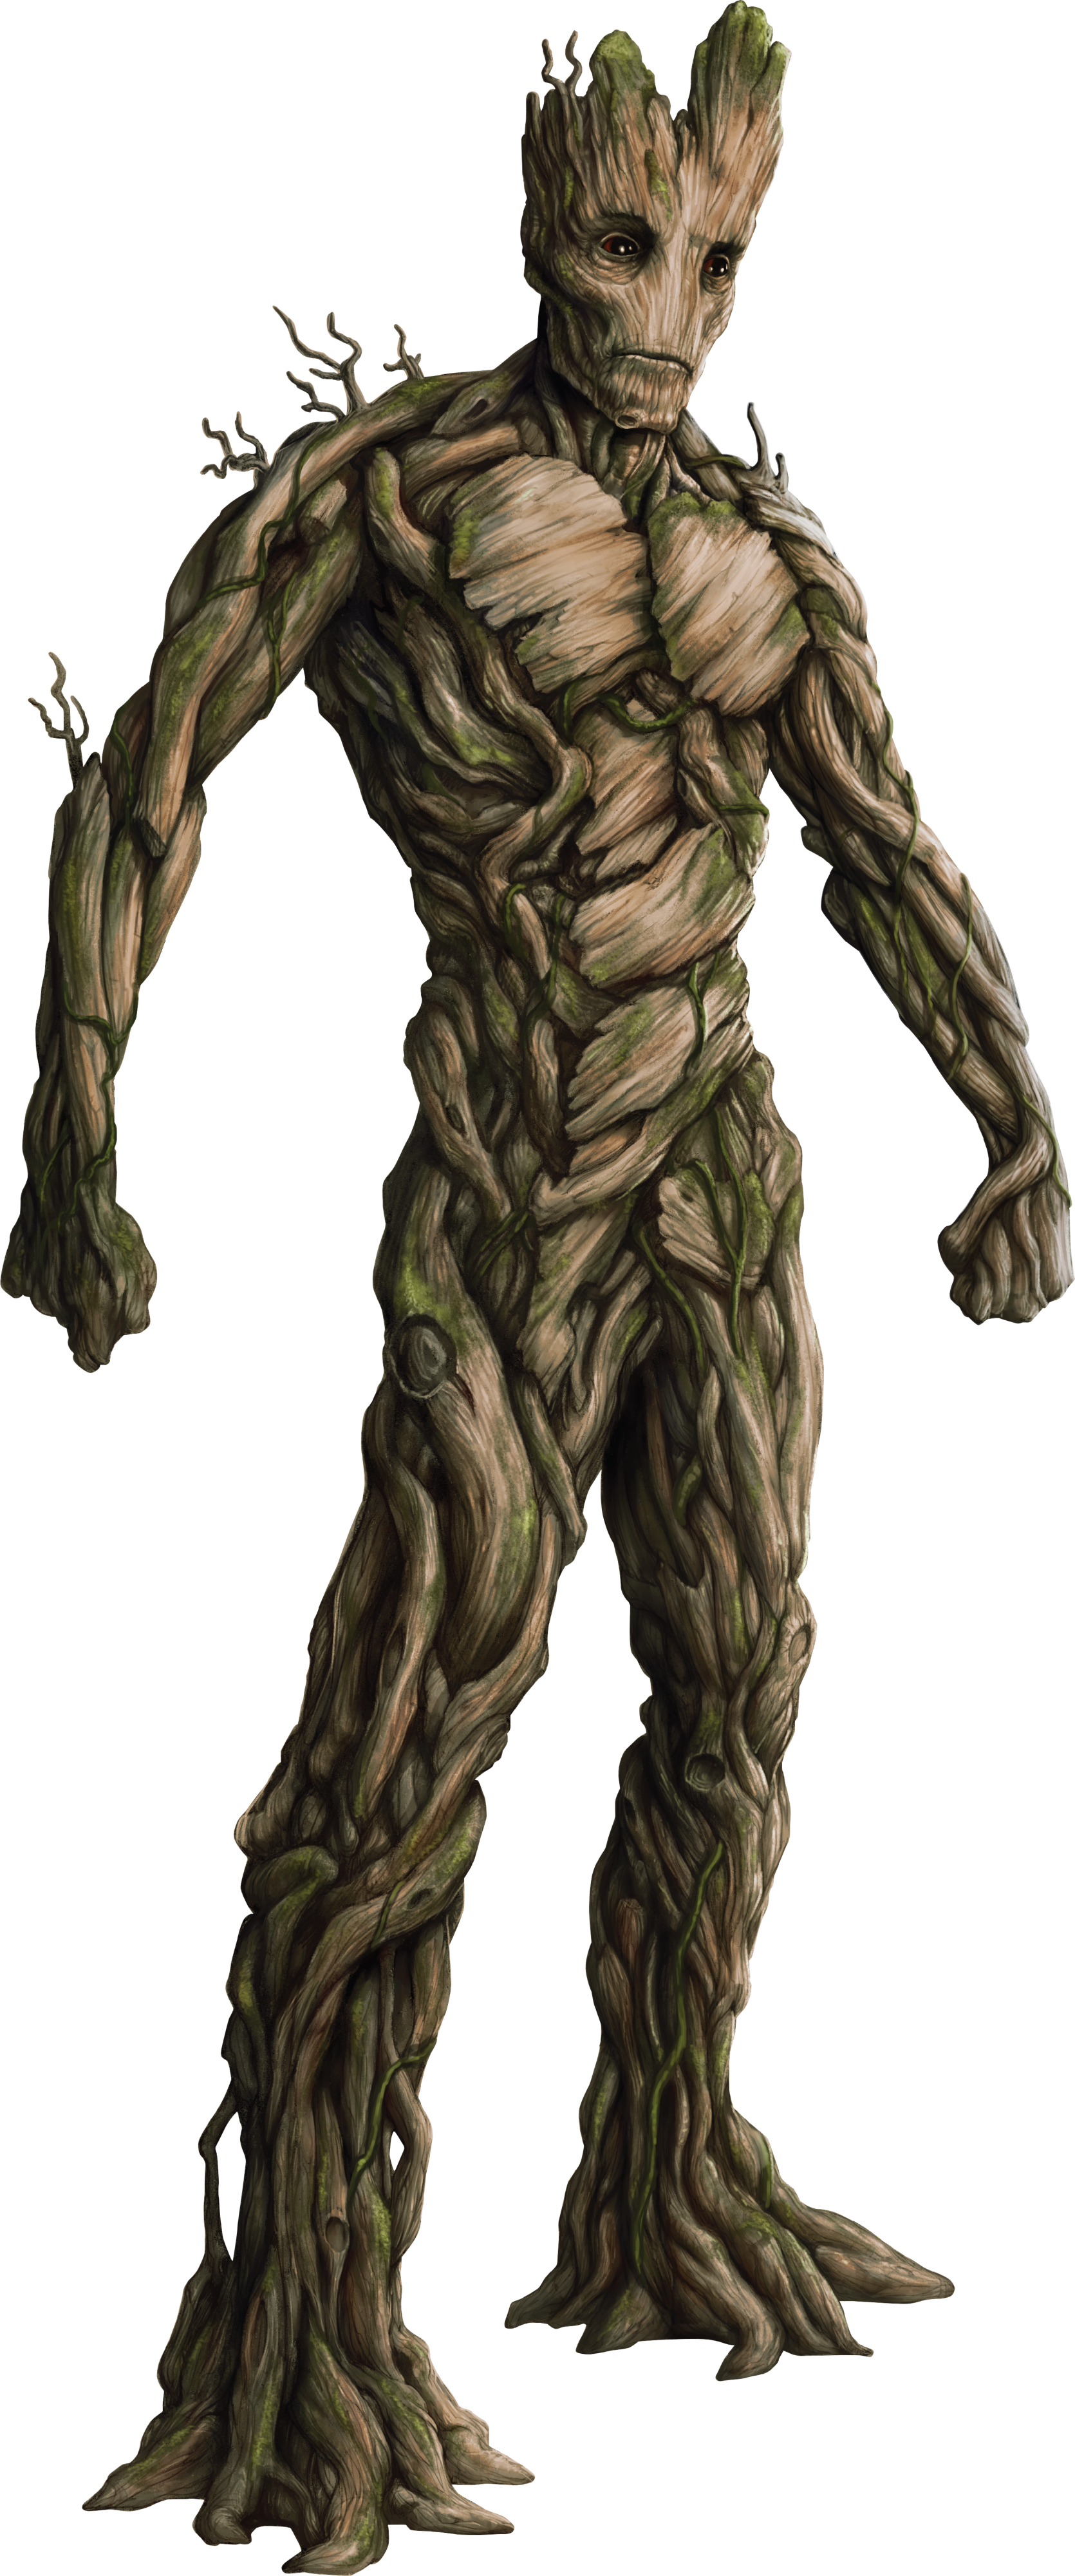 https://static.wikia.nocookie.net/characterprofile/images/4/45/Groot_GG_FH.png/revision/latest?cb=20190125132241